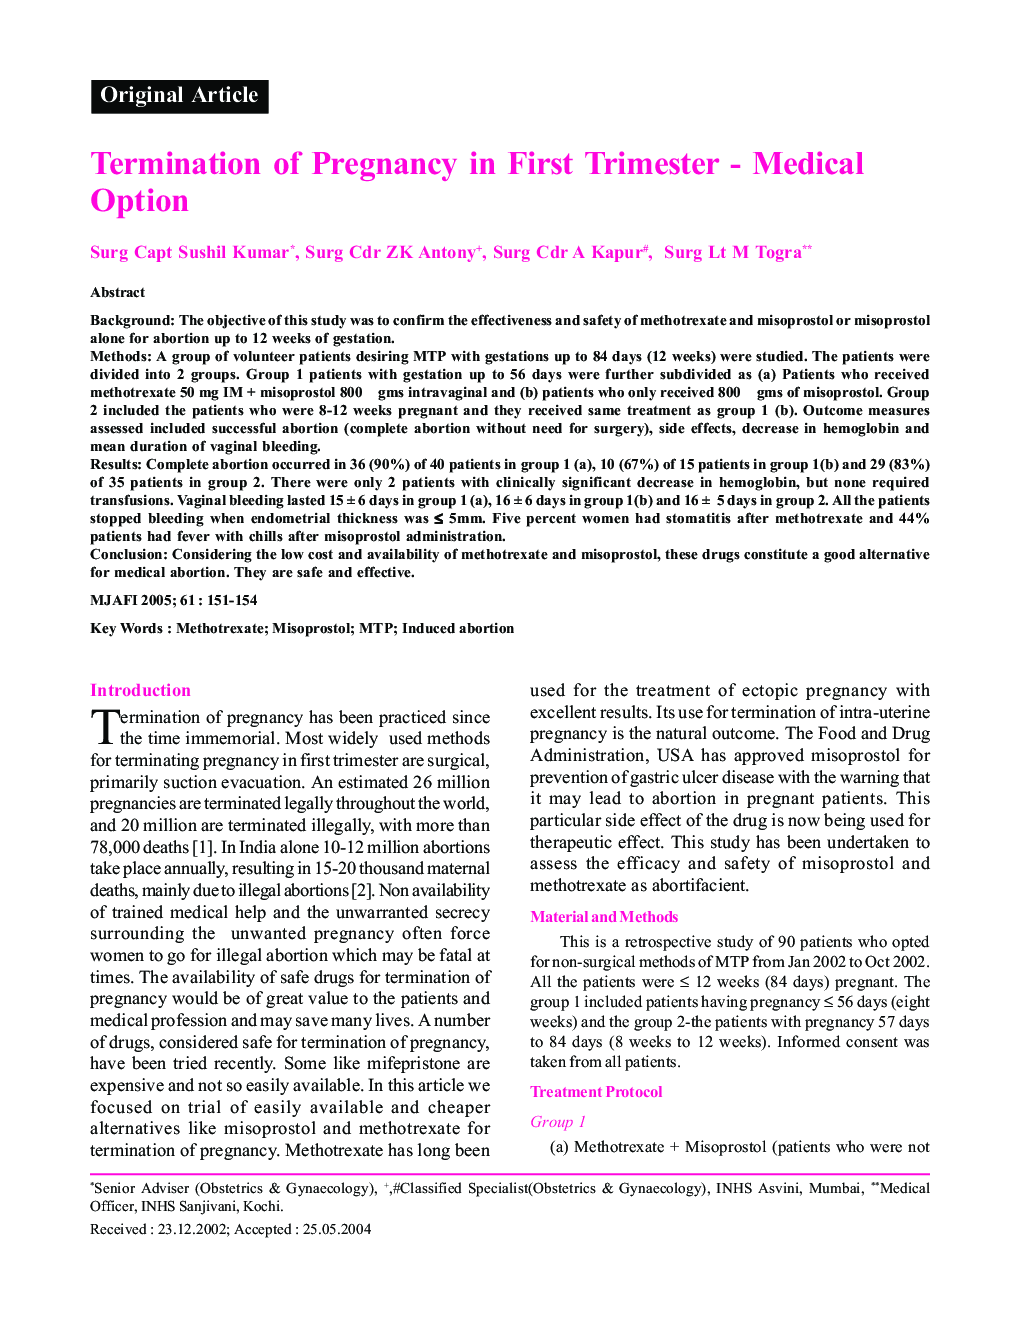 Termination of Pregnancy in First Trimester - Medical Option